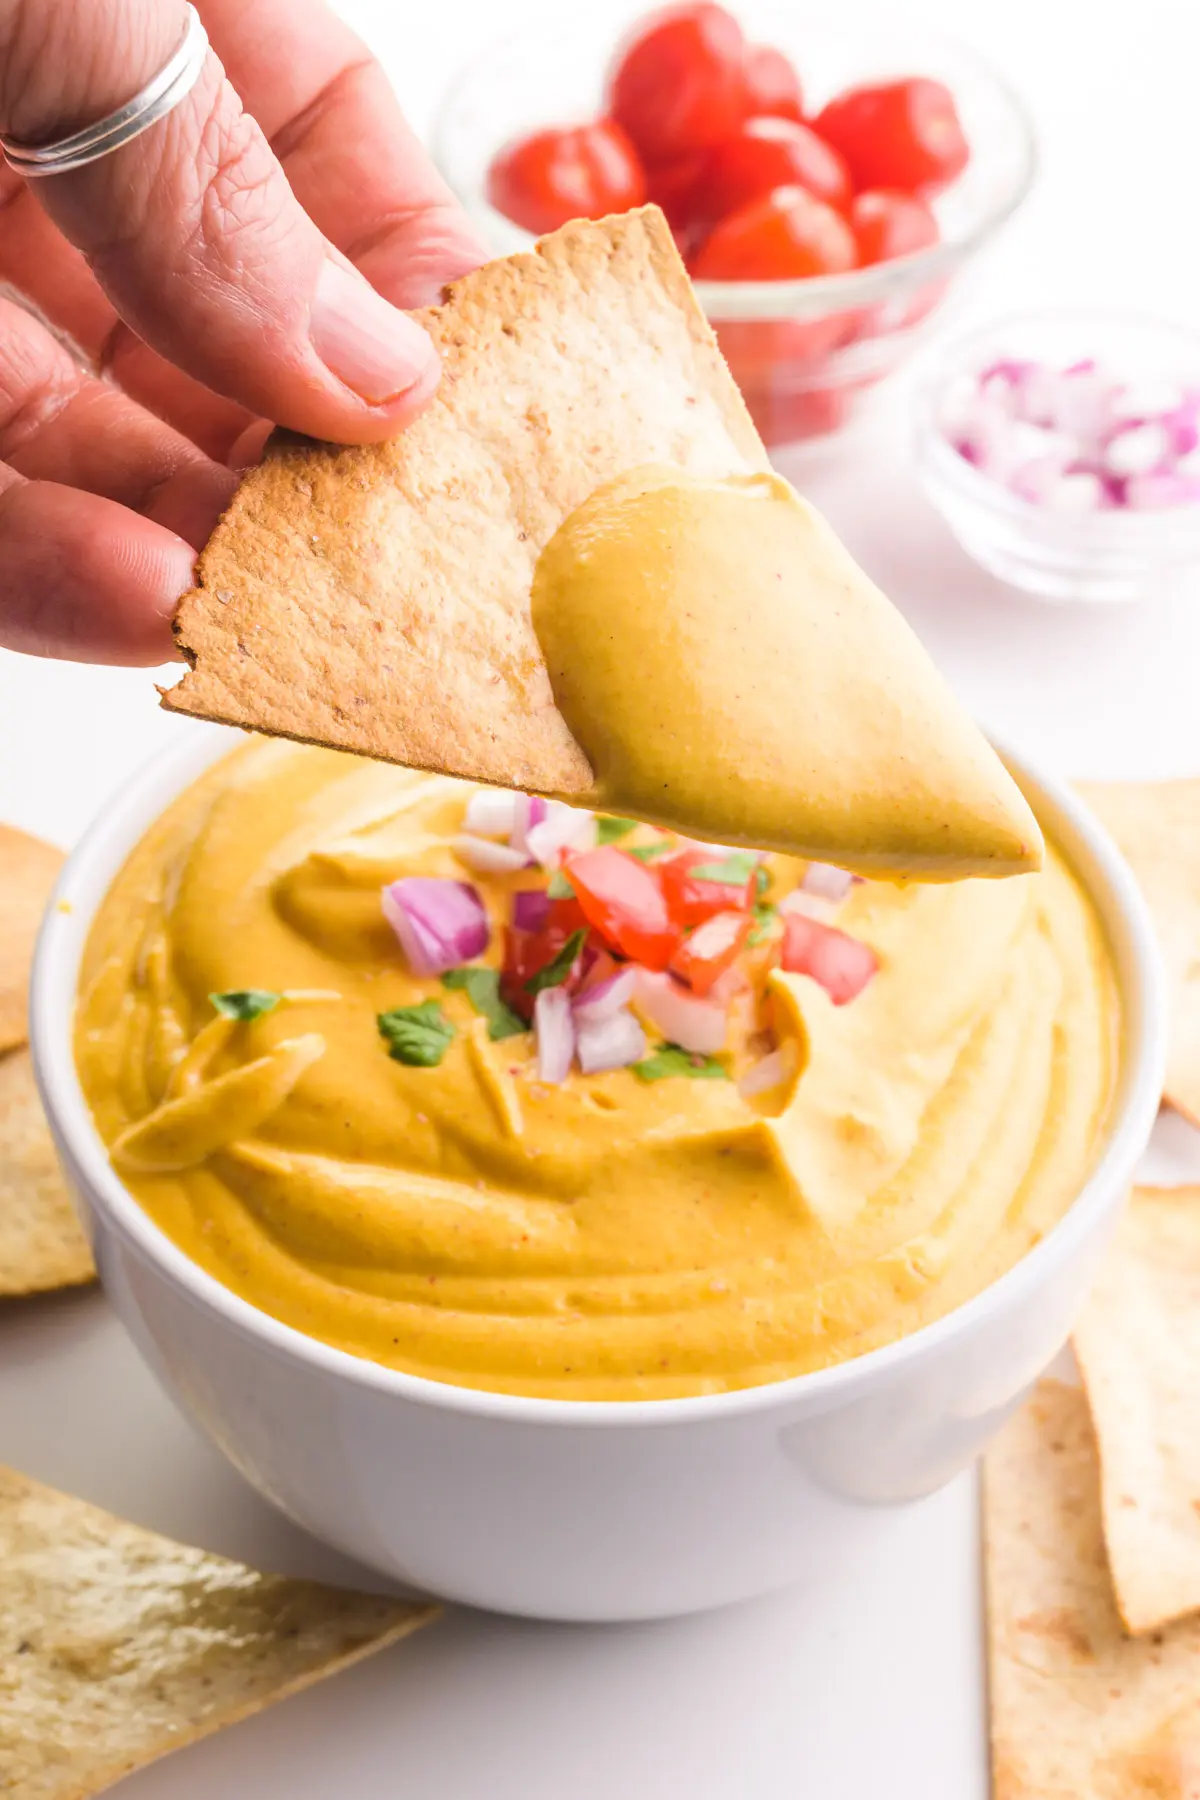 A hand holds a tortilla chip with lots of vegan nacho cheese sauce on top. The bowl of the sauce is below it and there are other ingredients like chopped tomatoes and red onions on top.